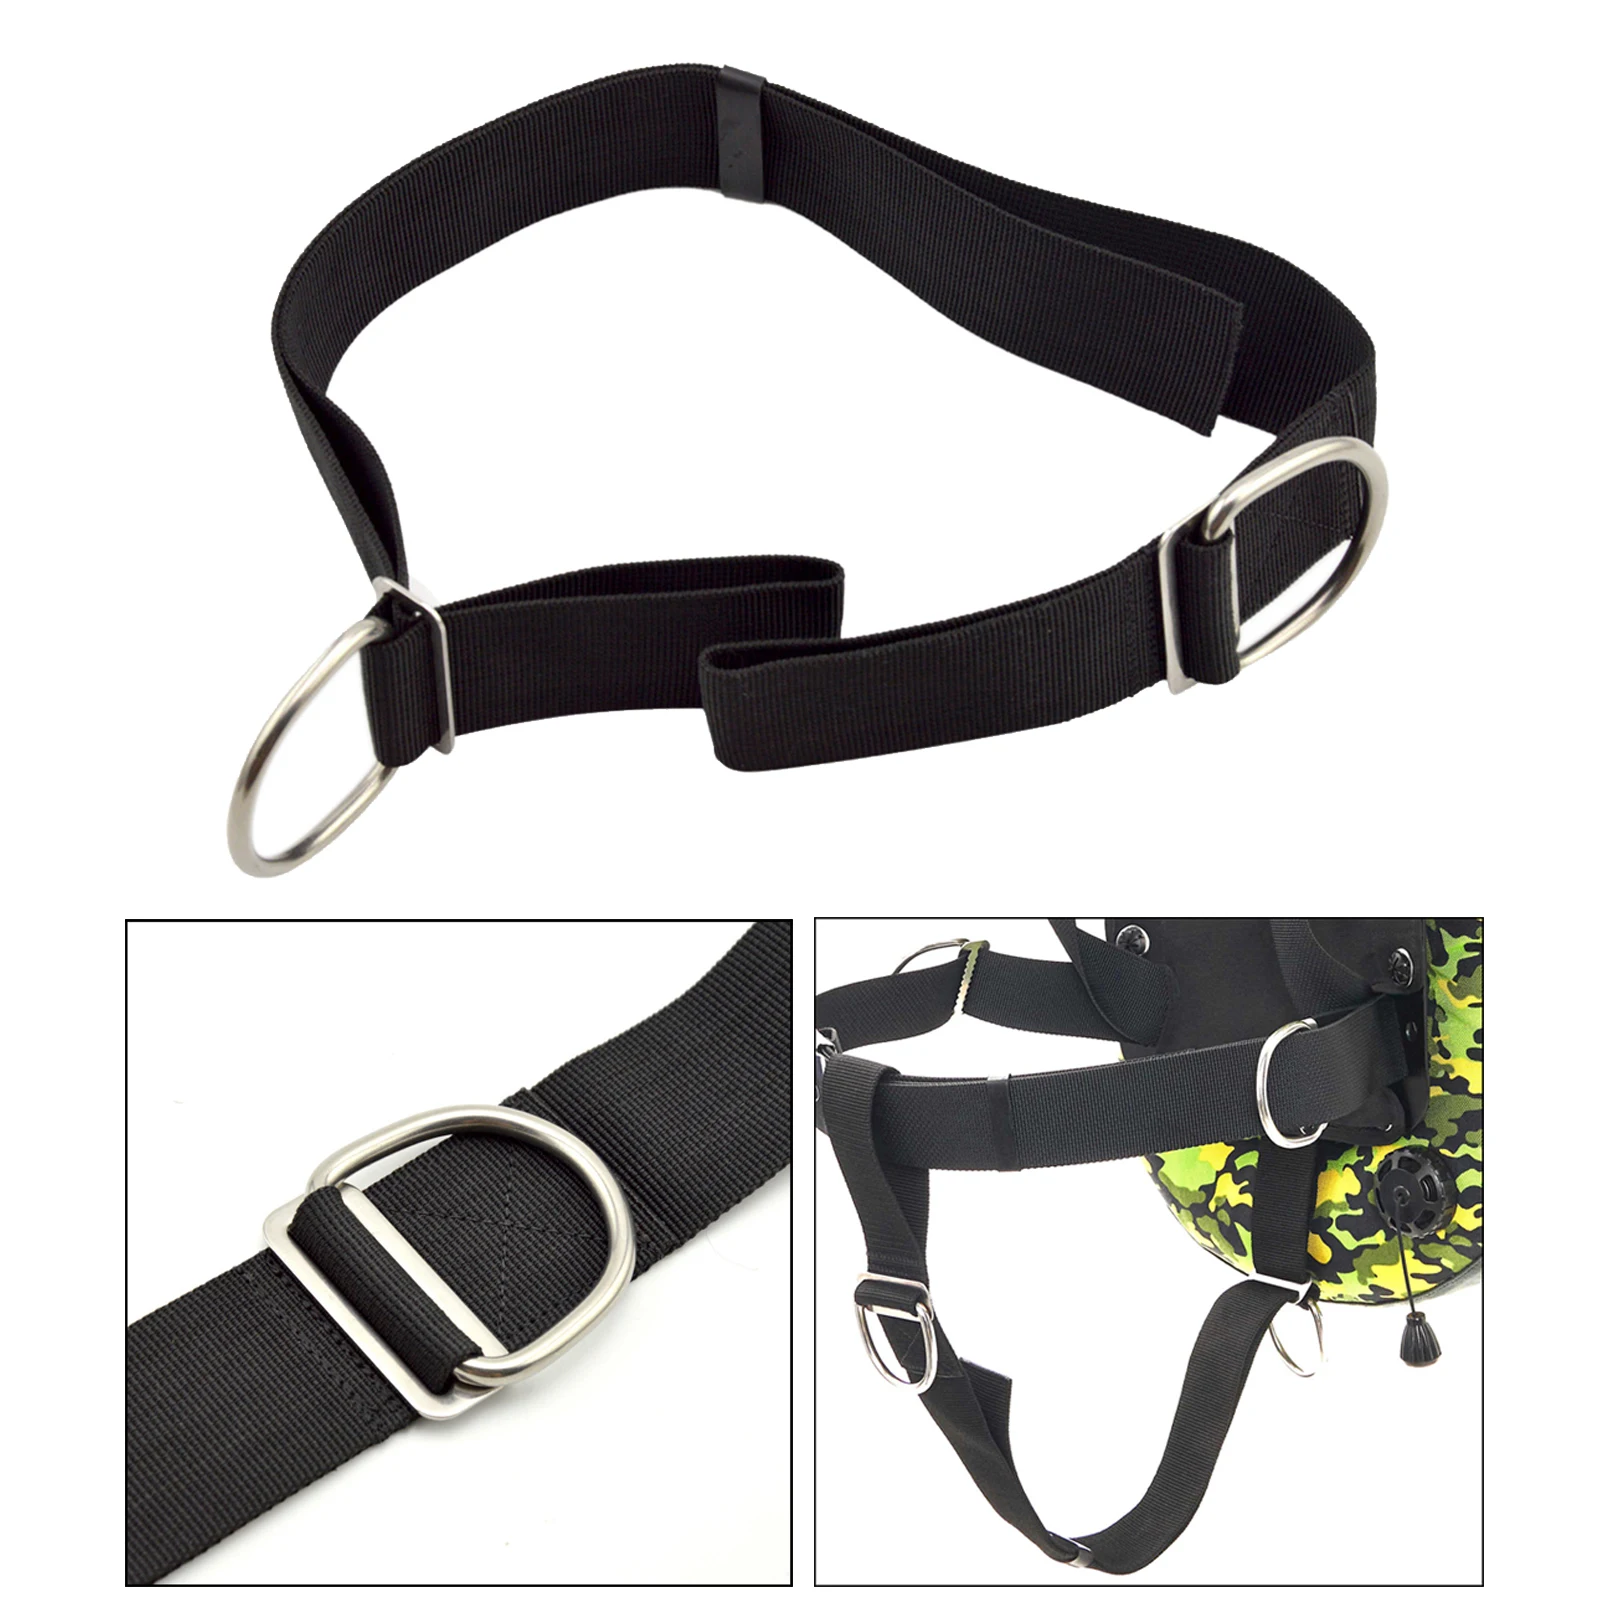 Tech Dive Crotch Strap with 2 D-rings 2inch Divers Gear Crotch Straps Black